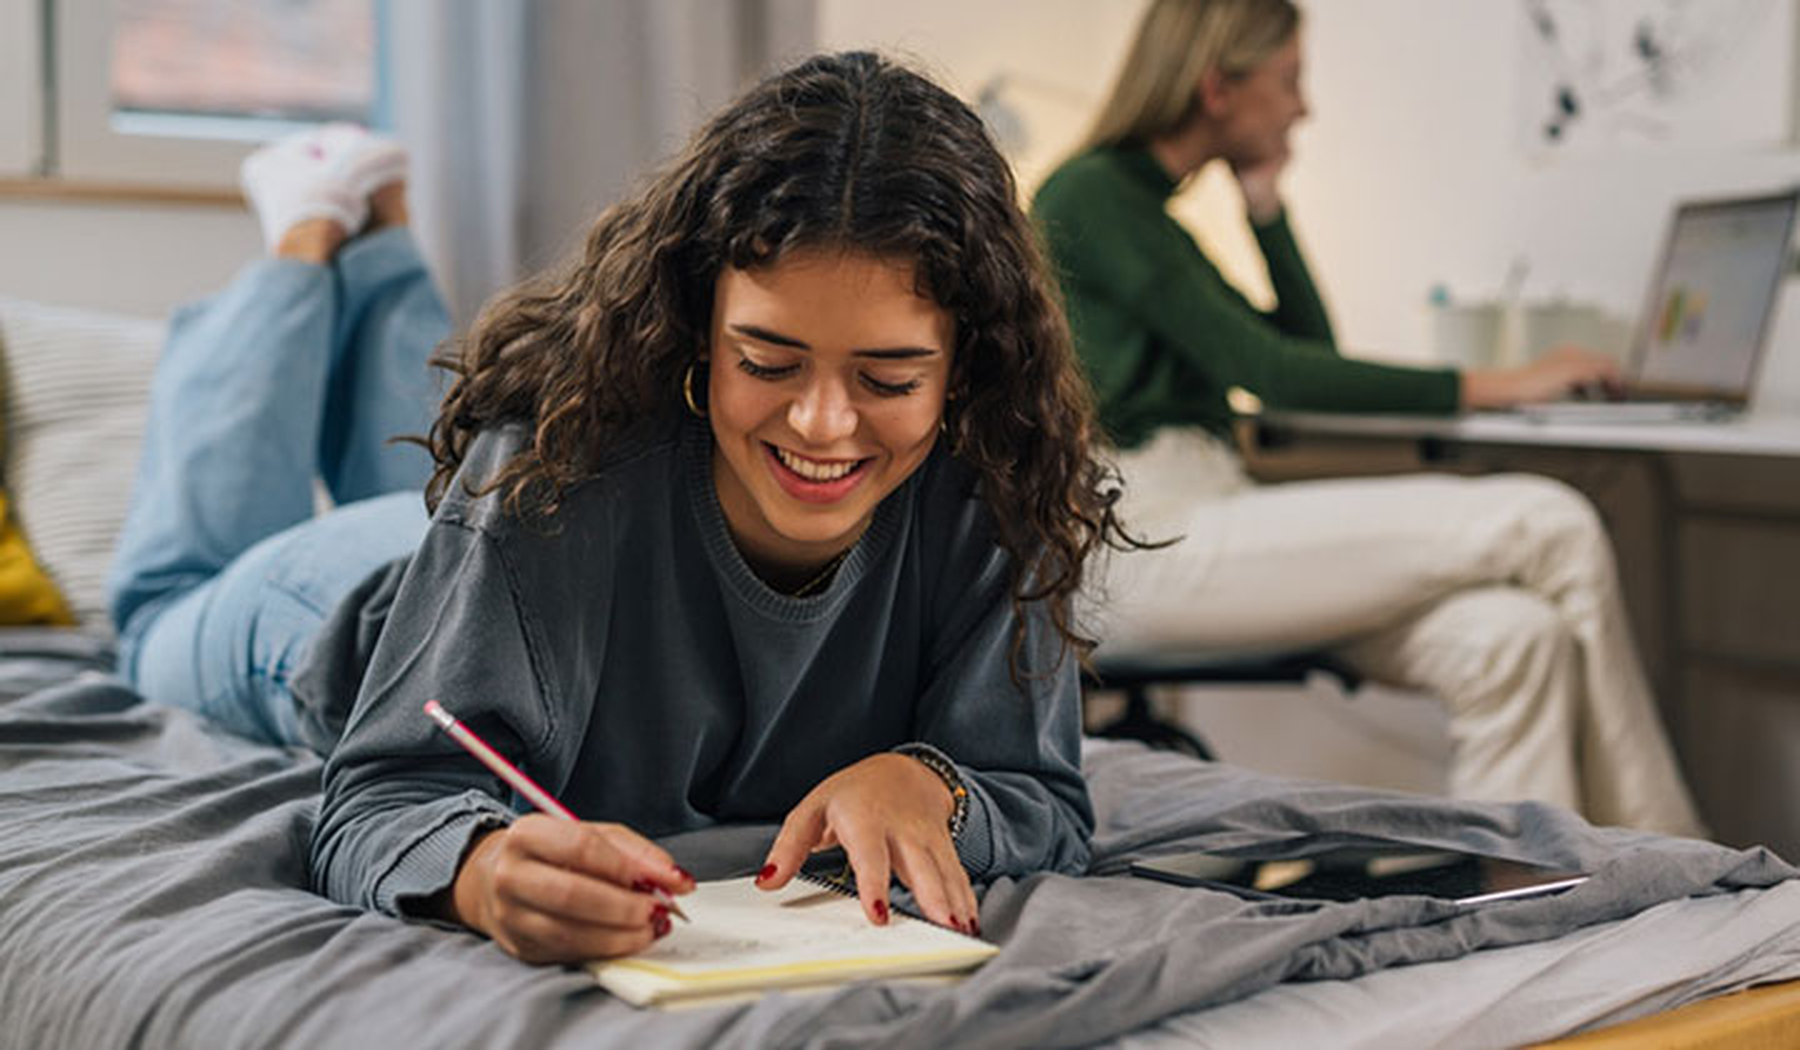 Smiling college student doing homework on her bed